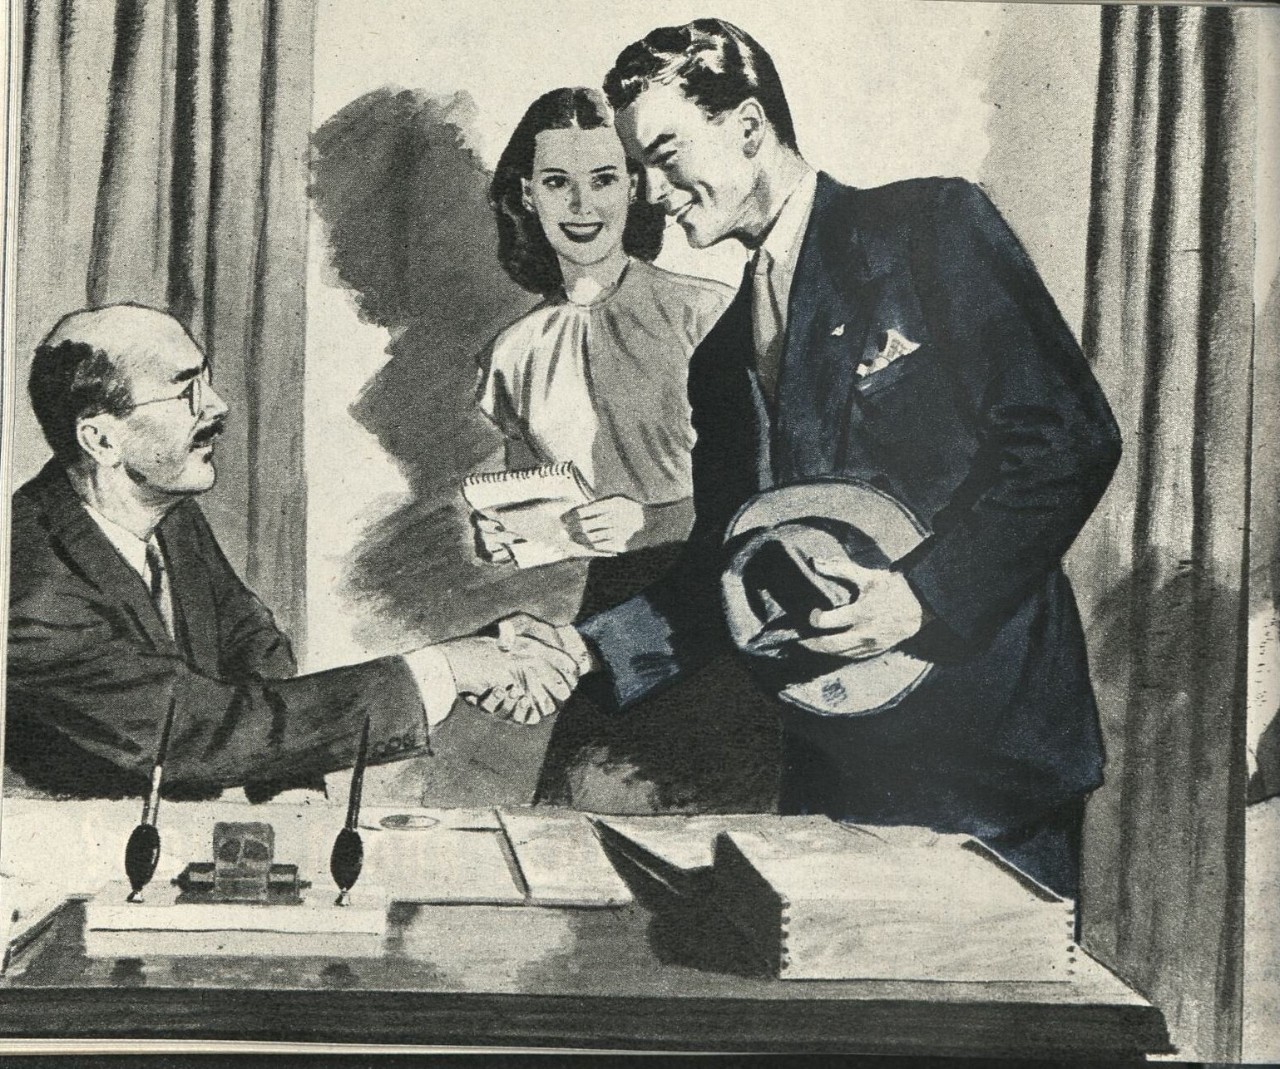 A man standing and shaking the hand of another man who is seated - a woman with a pad looks on